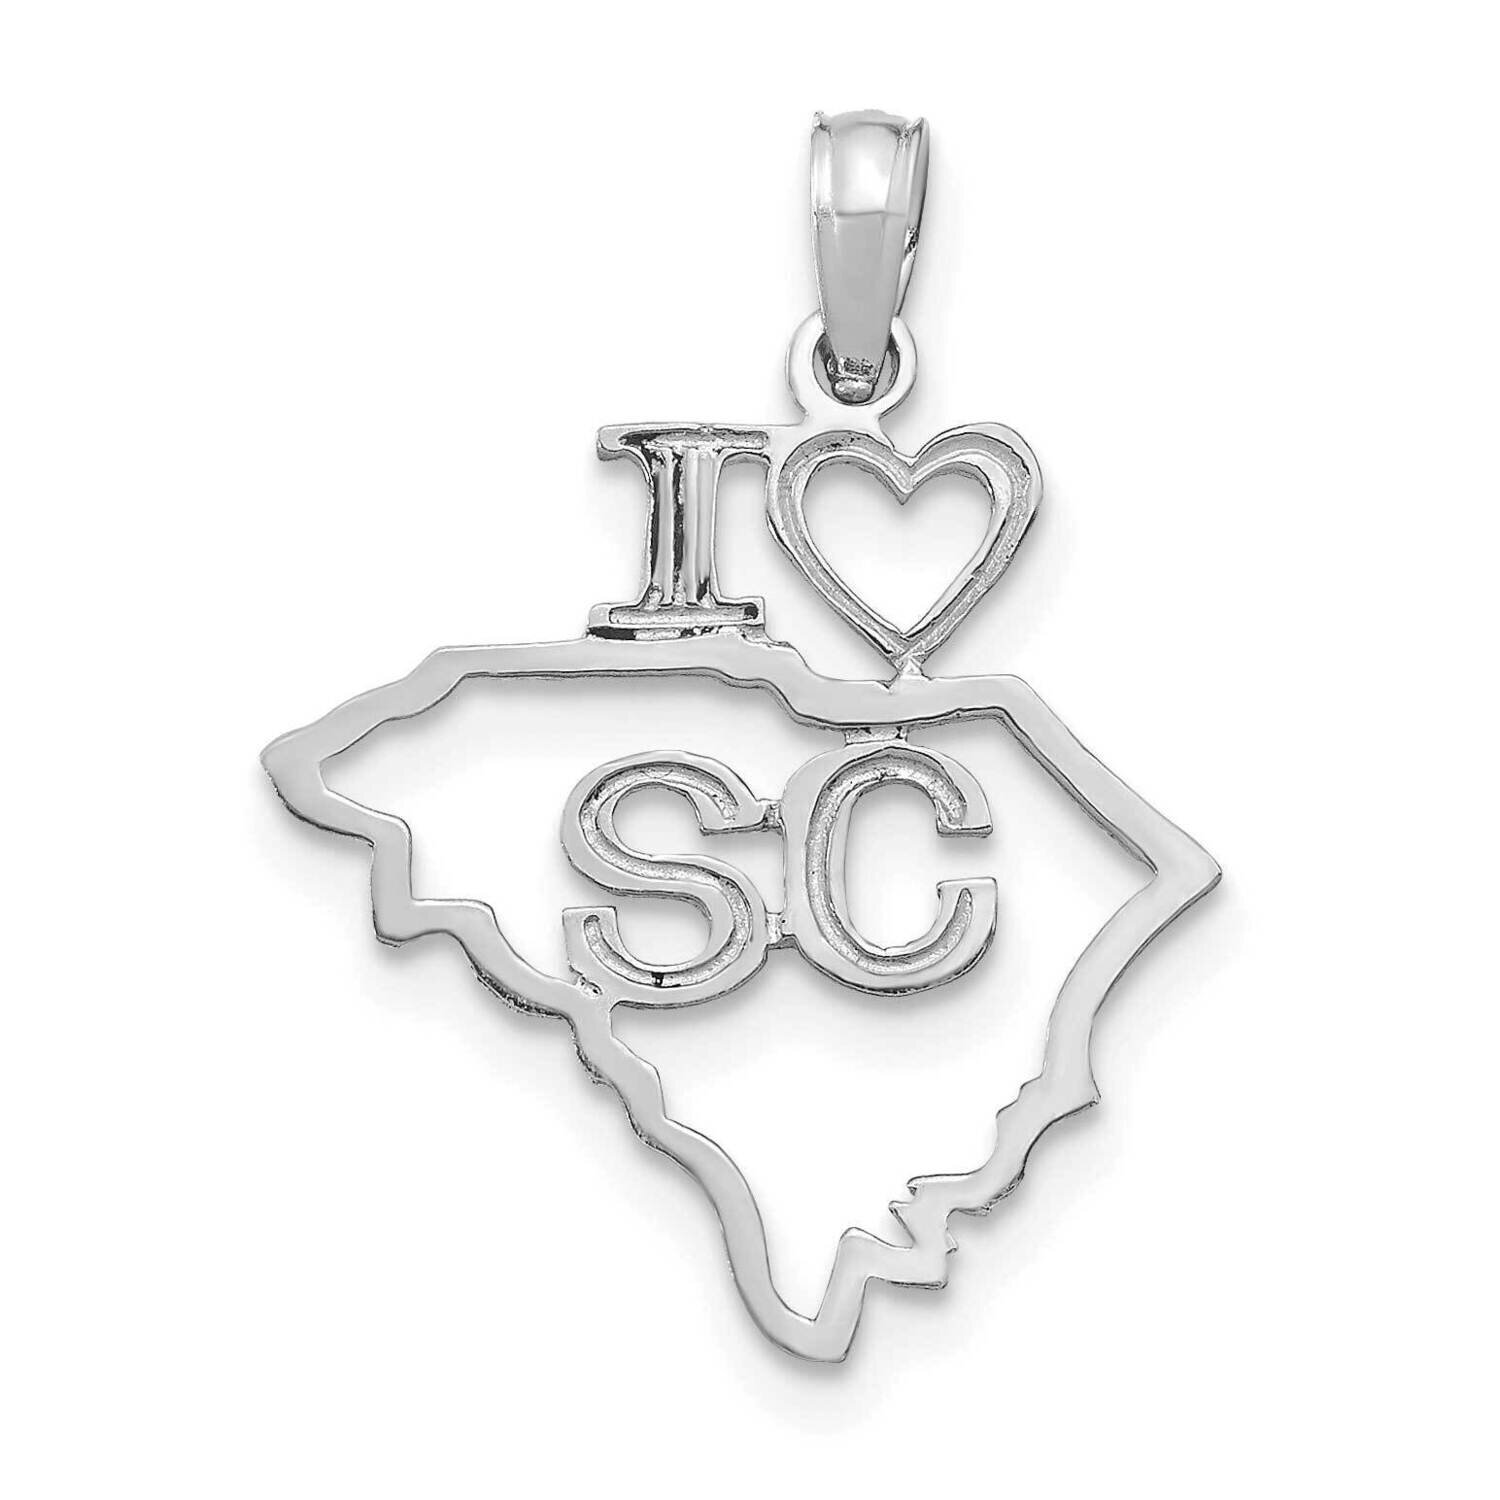 South Carolina State Pendant 14k White Gold Solid D1187W